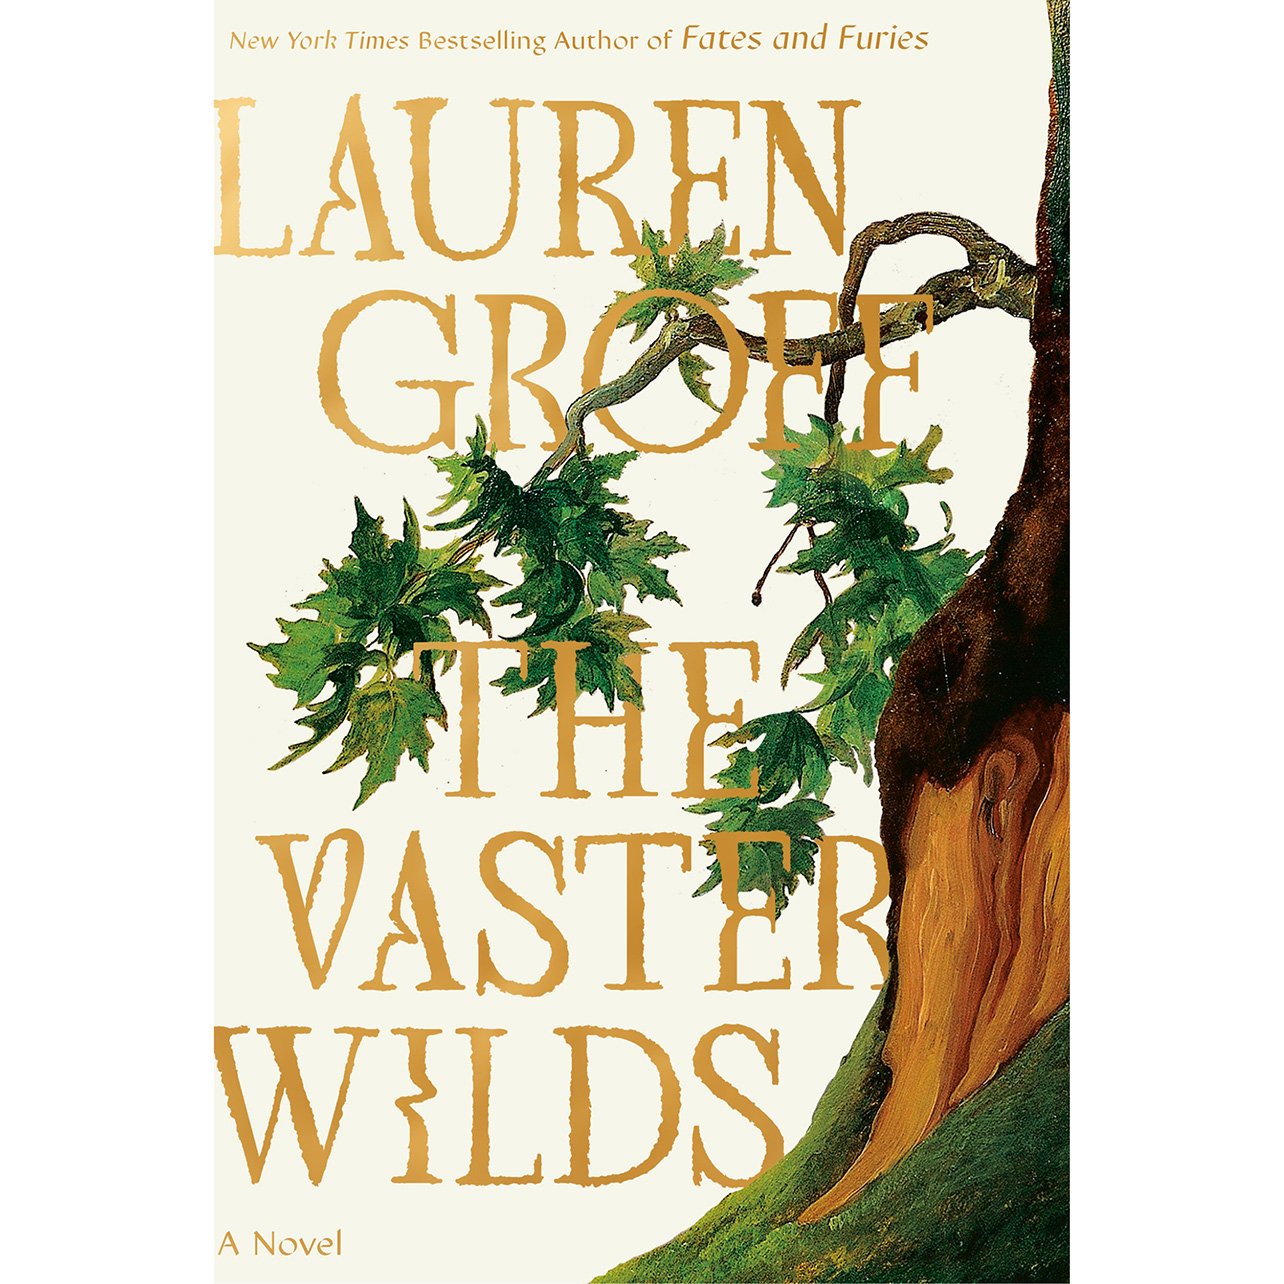 Vaster Wilds book by Lauren Groff available at Books & Books